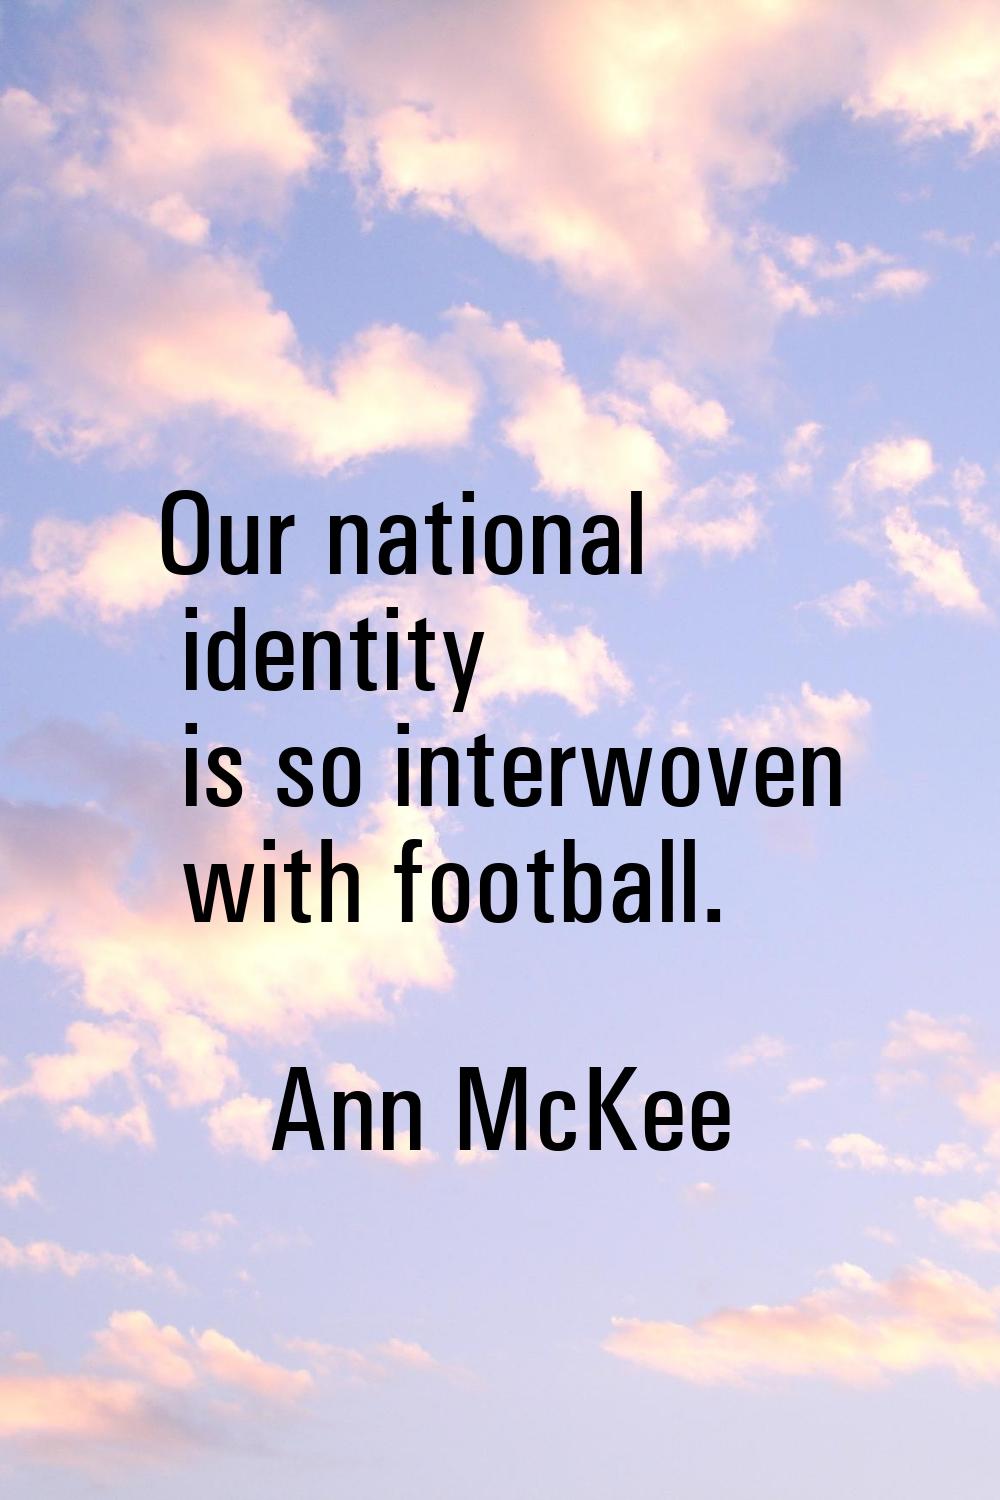 Our national identity is so interwoven with football.